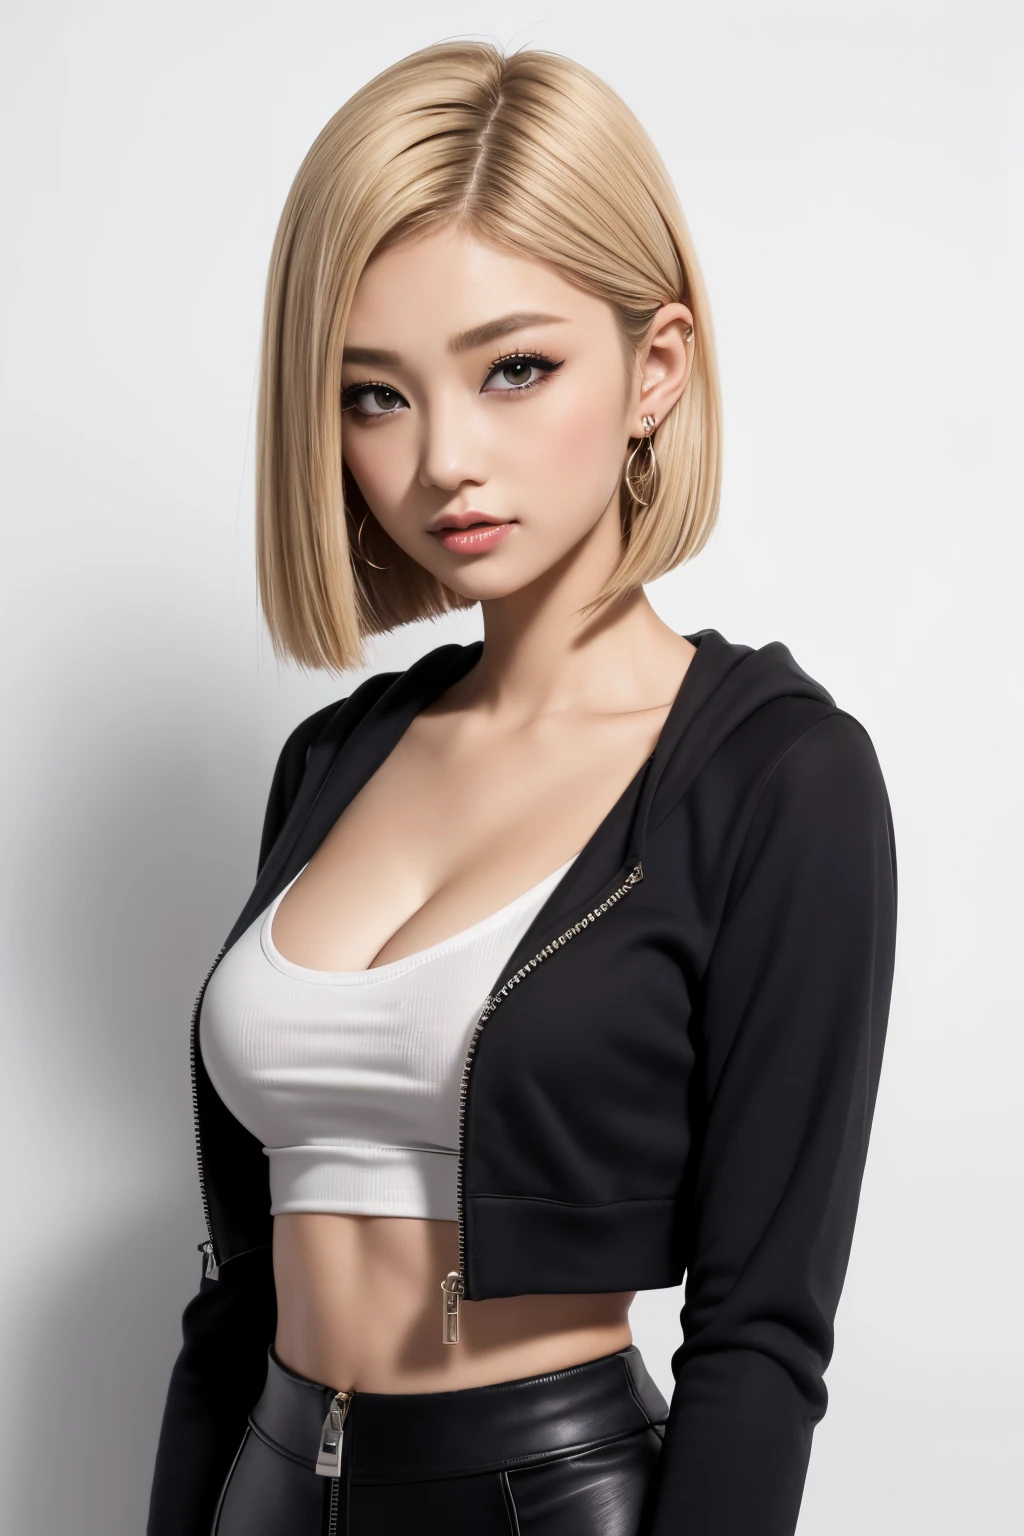 8K RAW photos, 17-year-old cool Korean, big round breasts, cleavage, cropped length zip hoodie with open front, cropped length top, skirt, beautiful eyes in detail, eyelashes, beautiful double eyelids, eyeshadow, slit eyes, perfect eye makeup, seductive smile, beautiful thin legs, bright blonde hair, bob cut, earrings,